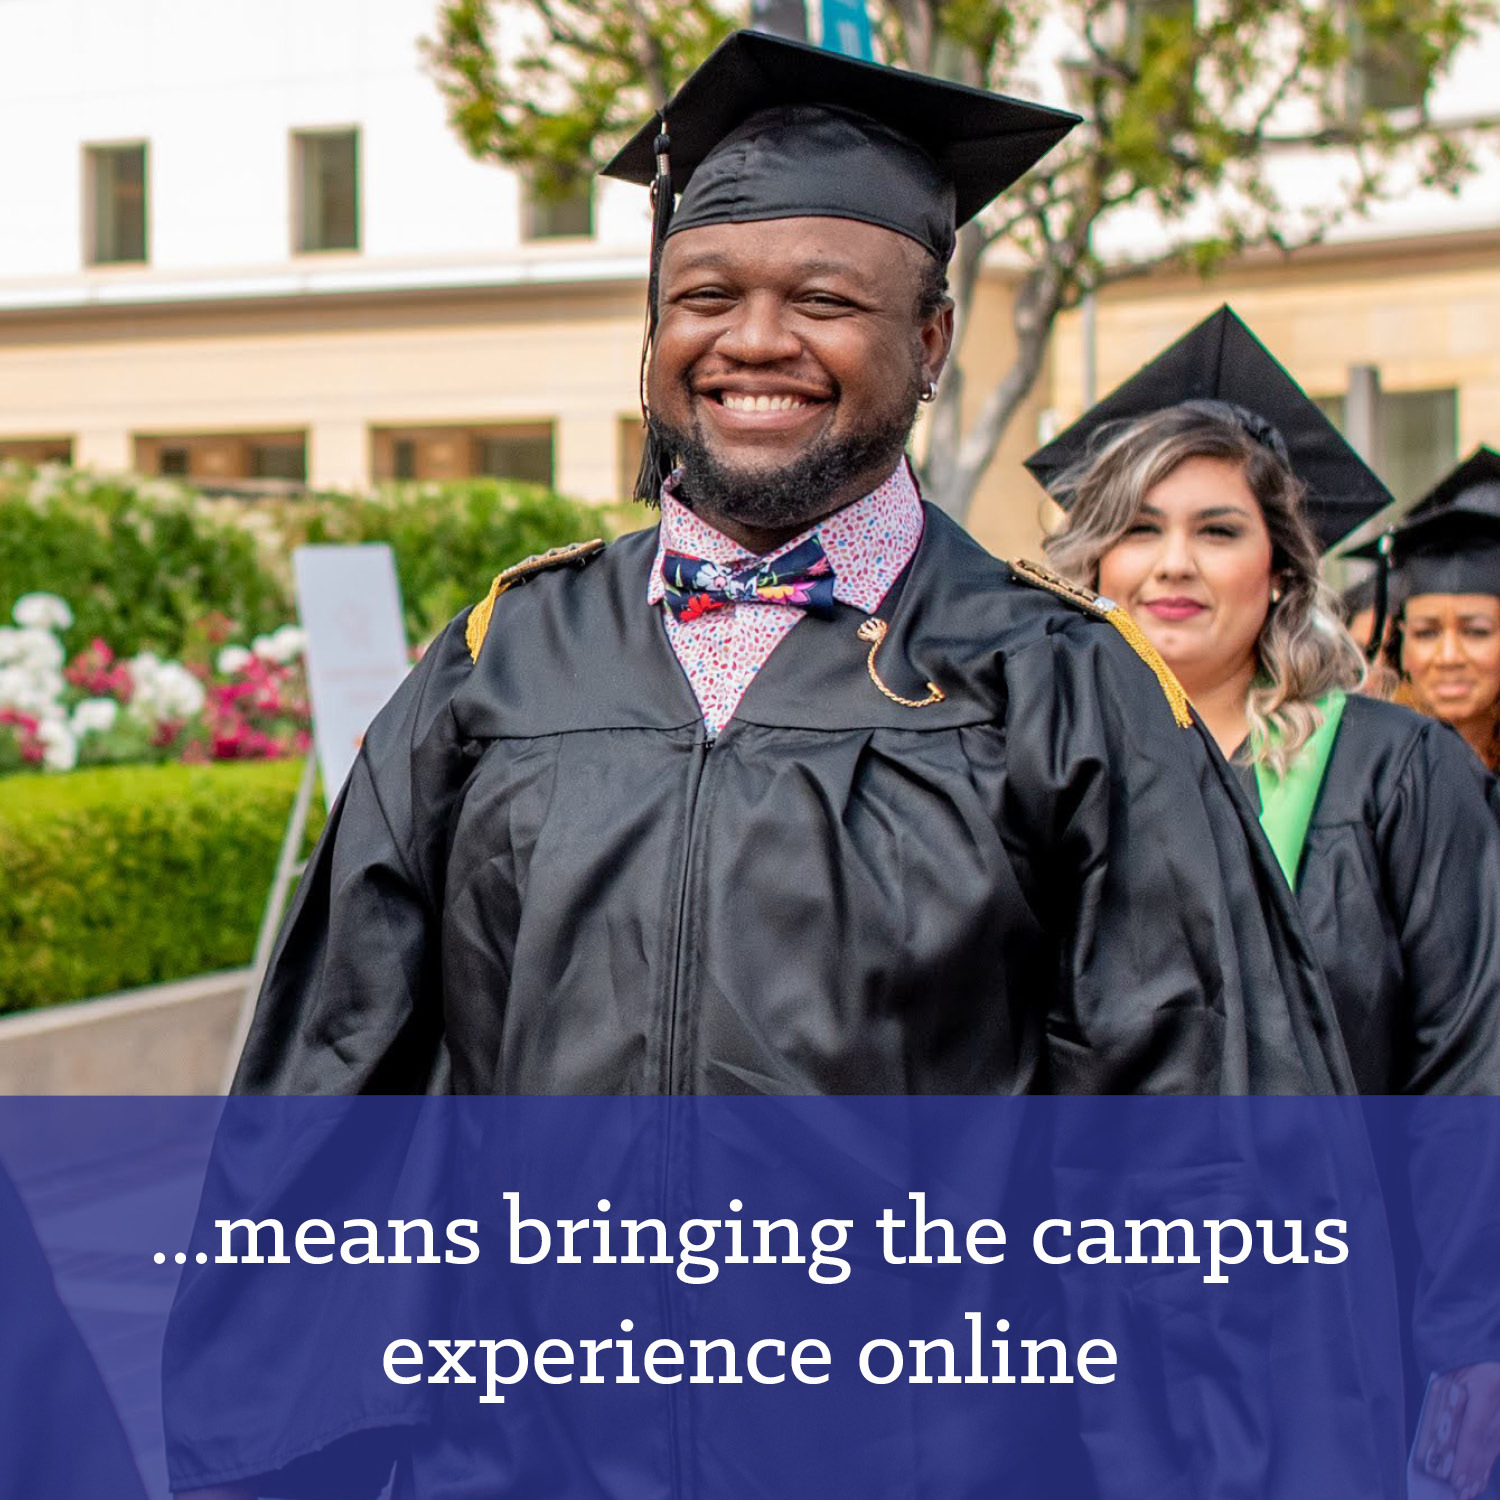 Campus experience online